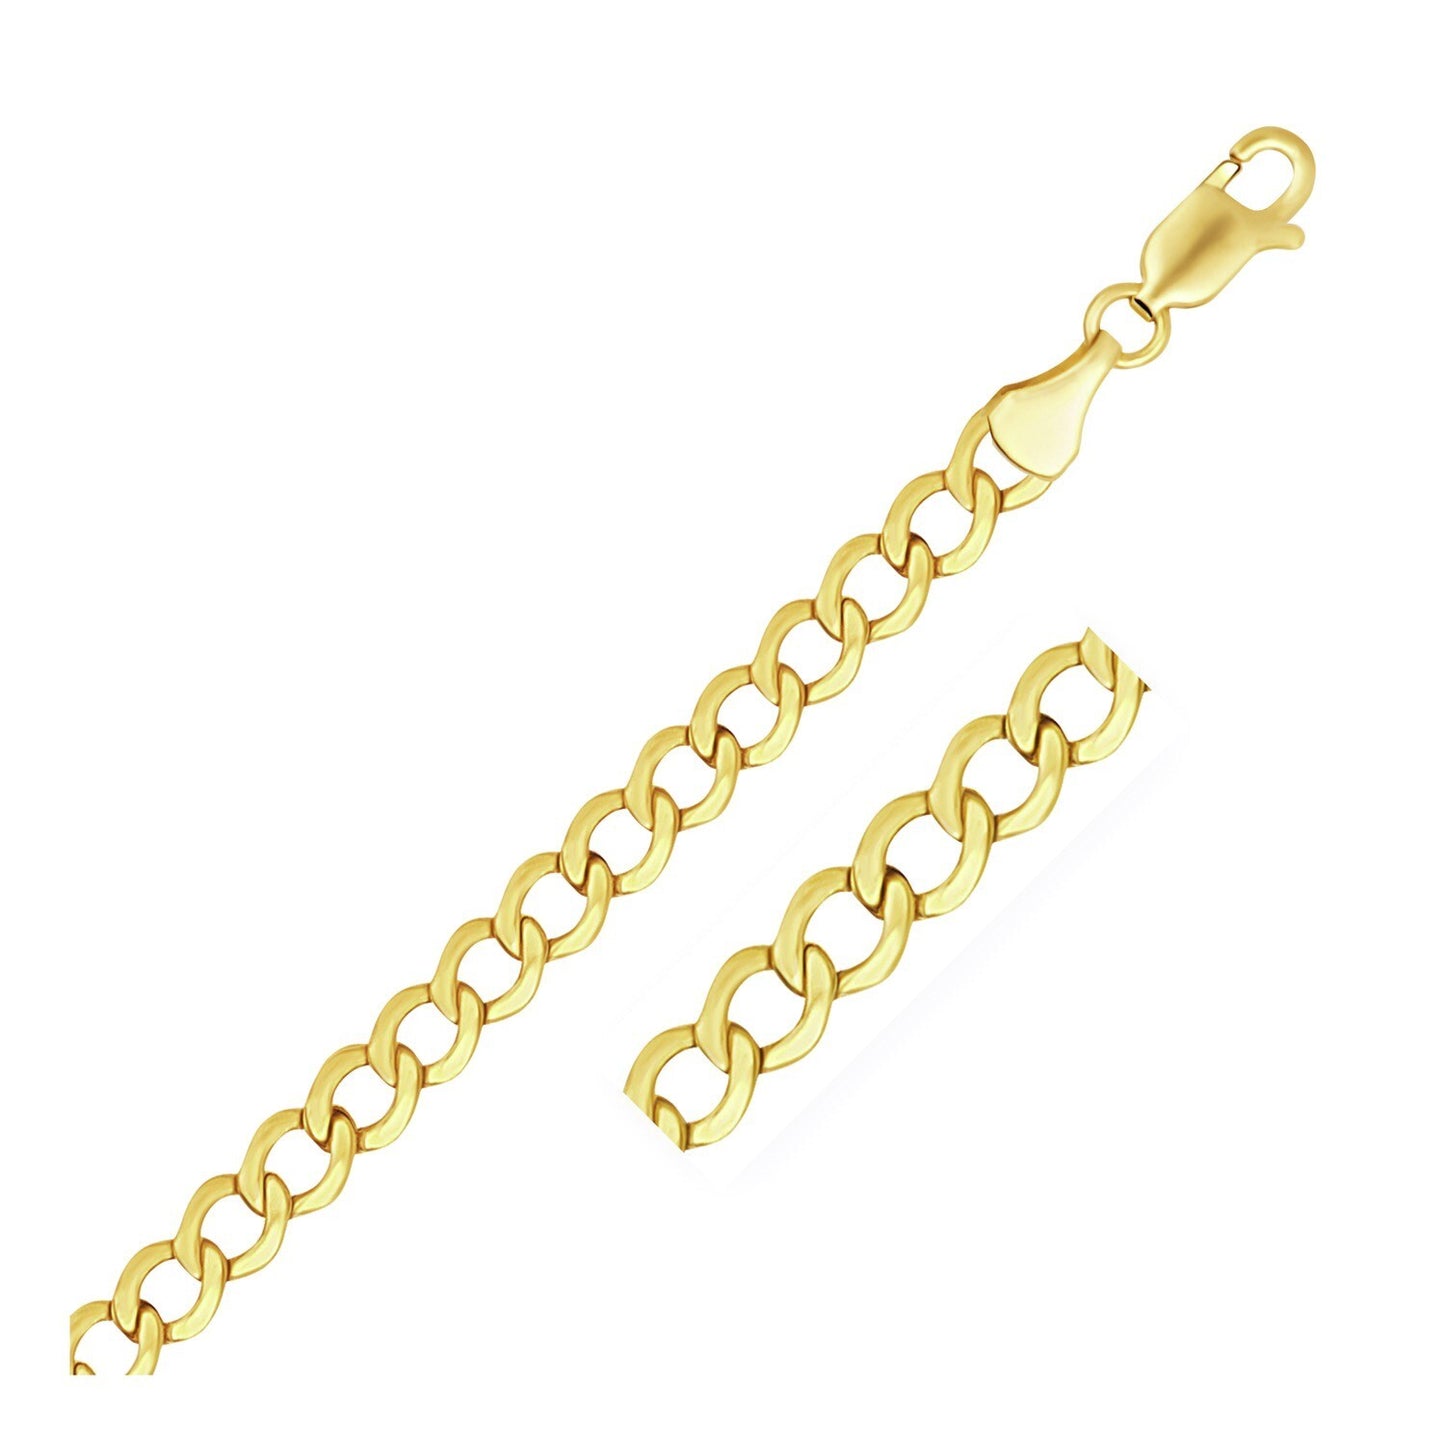 Enhance your look with this Fabulous Women's 5.3mm 10k Yellow Gold Curb Chain! This bold and eye-catching chain will add a touch of shimmer and style to your wardrobe. Its durable design and high-end craftsmanship make it perfect for everyday wear. Step out in style and make a statement with this 5.3mm 10k yellow gold curb chain!